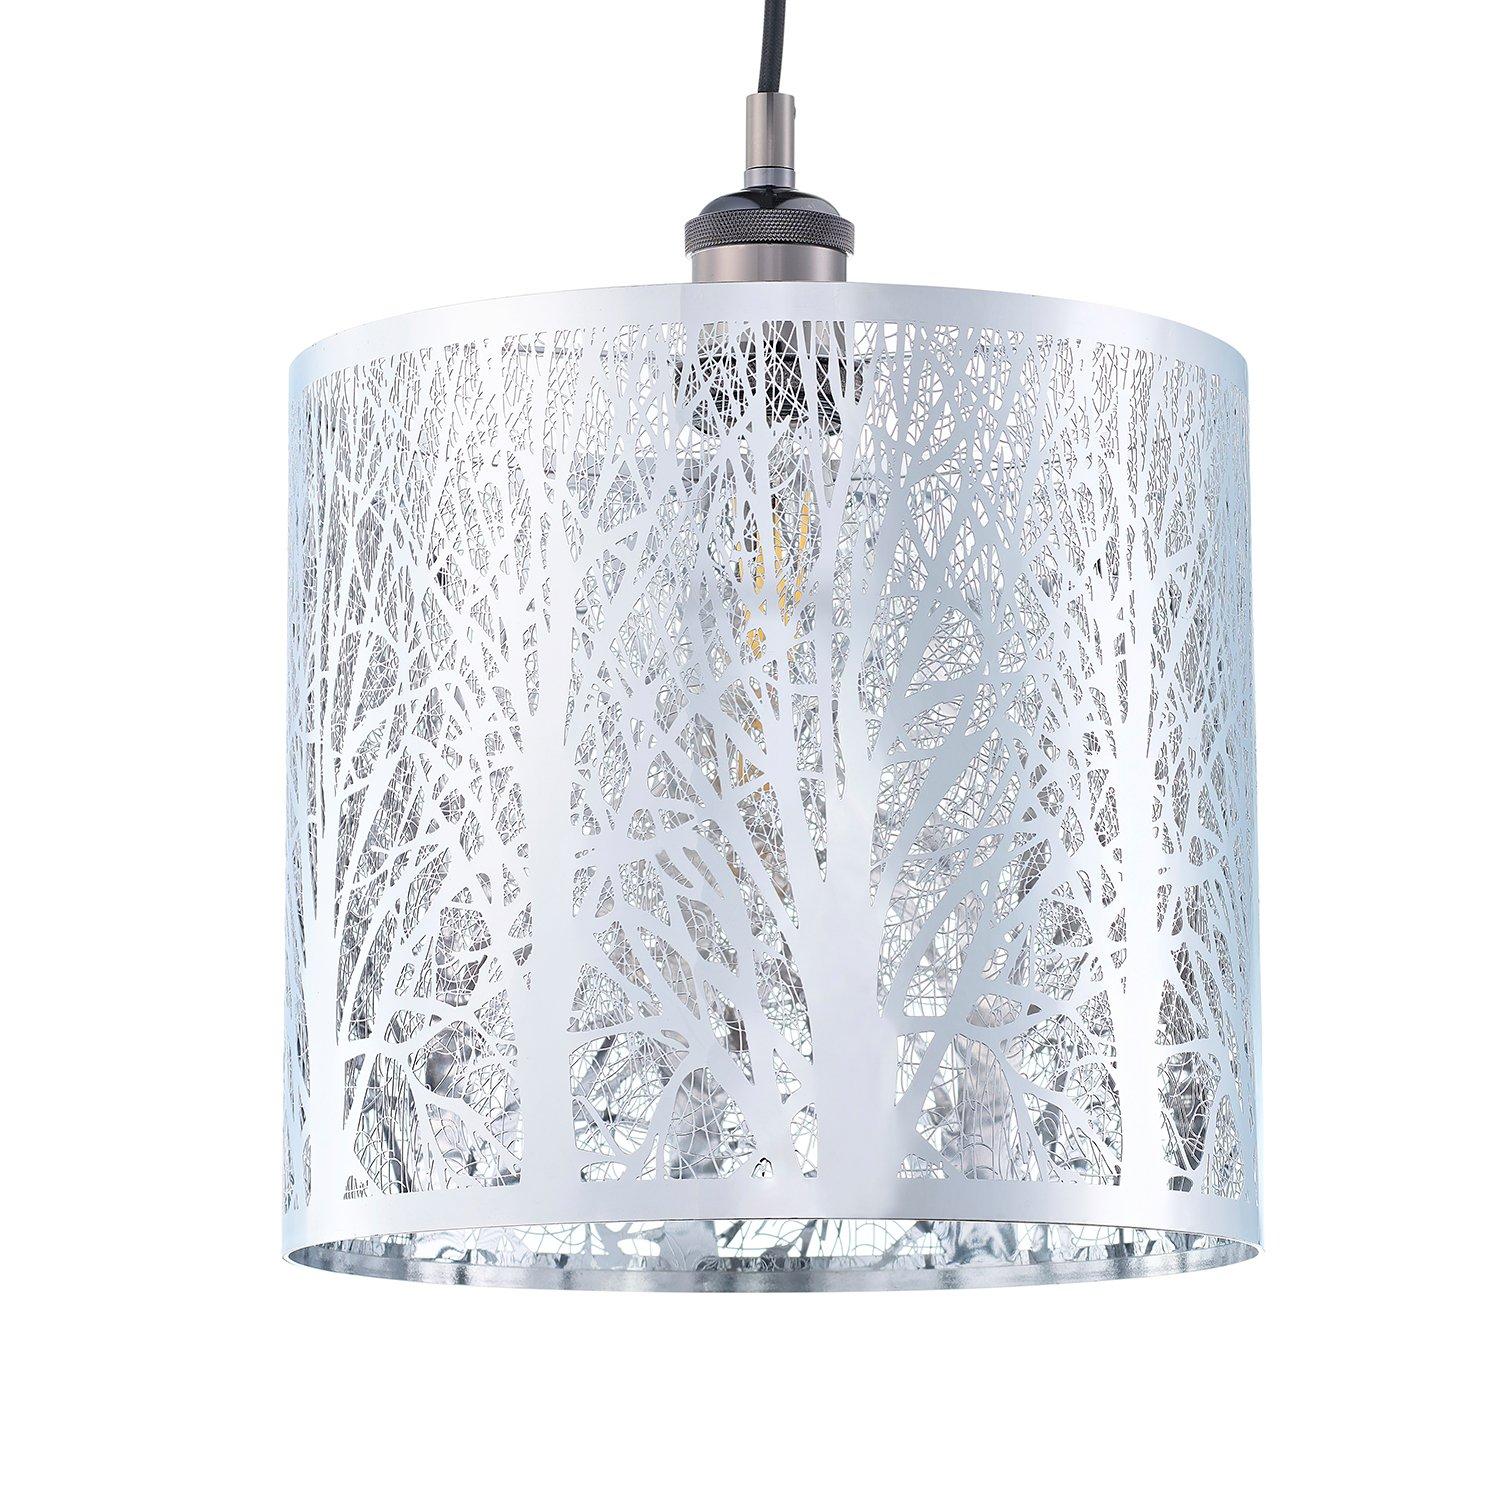 Unique and Beautiful Metal Forest Design Ceiling Pendant Shade